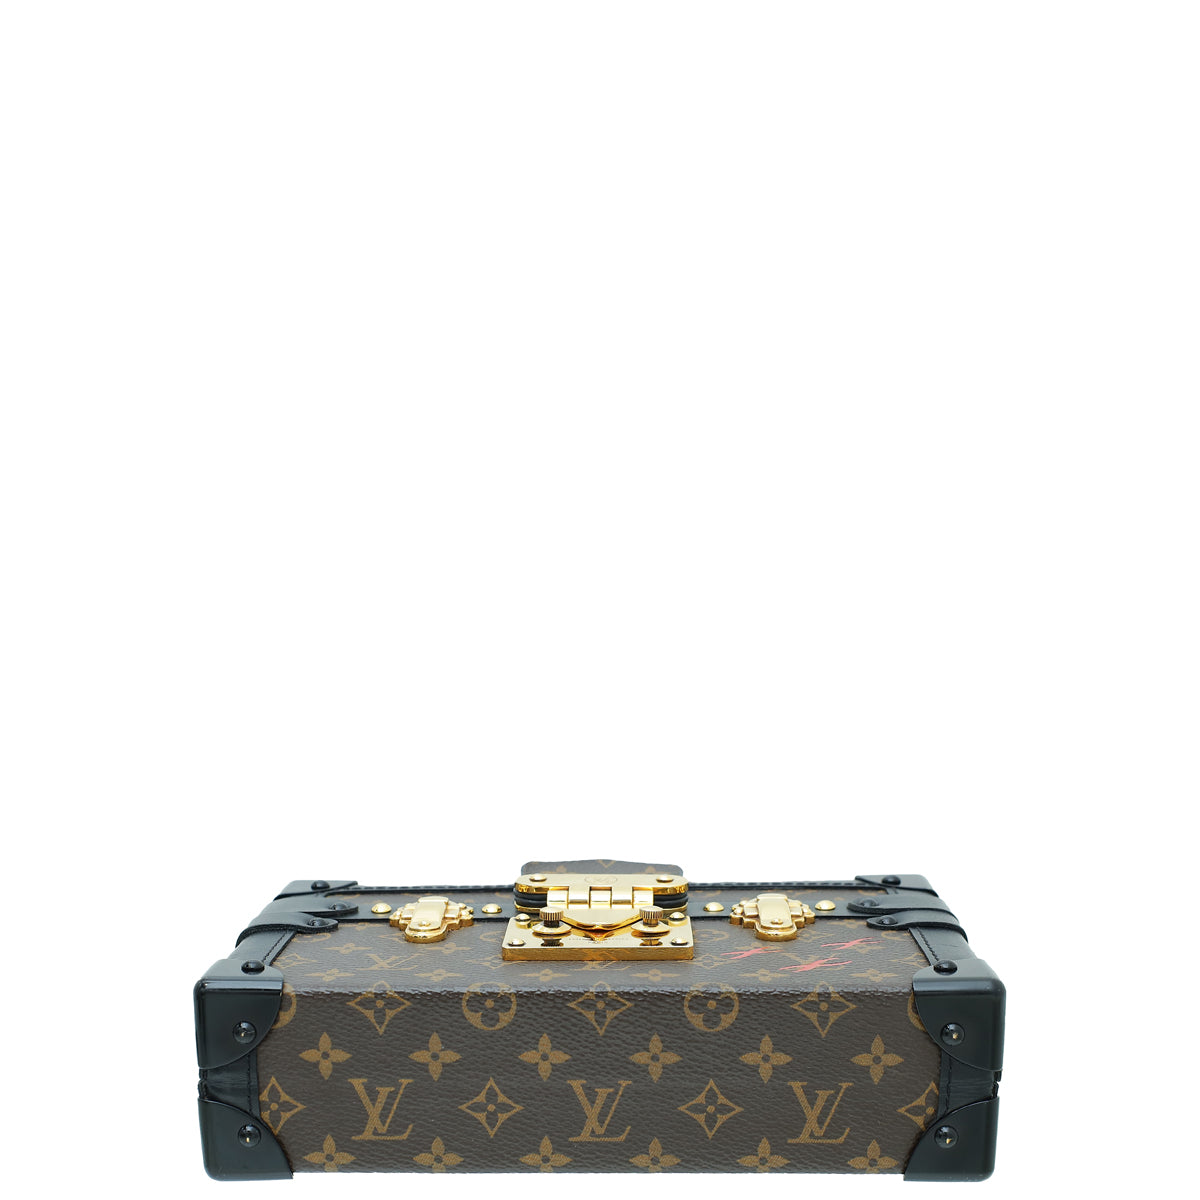 Load image into Gallery viewer, Louis Vuitton Monogram Petite Malle Bag
